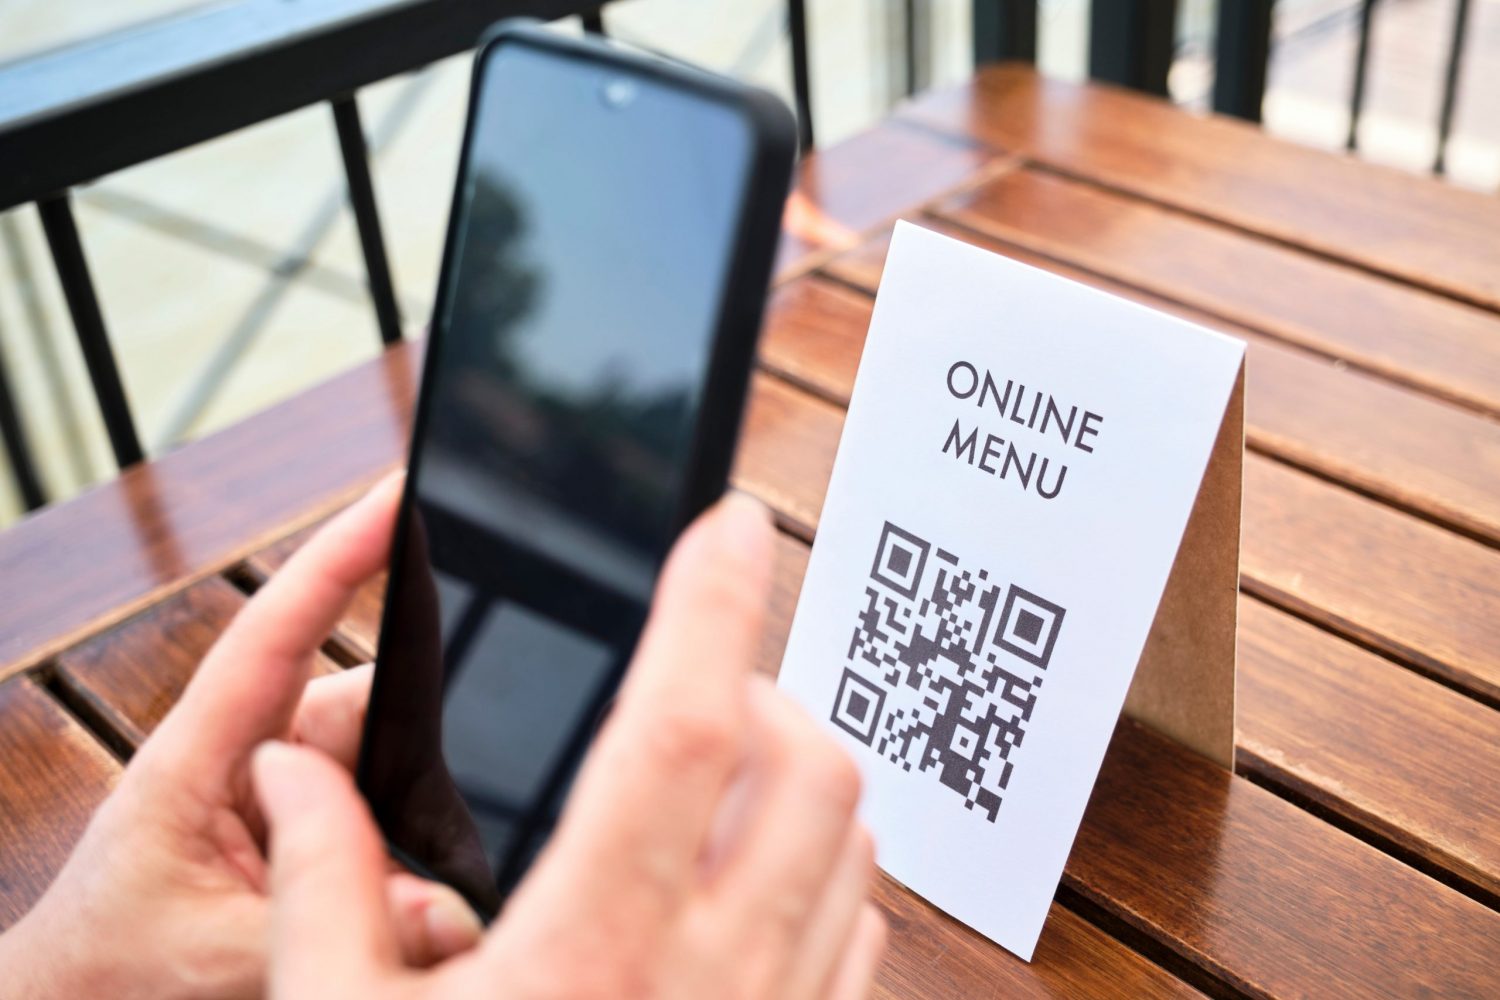 Hands of an unrecognizable woman scanning a QR code with a smartphone to access a restaurant menu; use of contactless technology in everyday life.